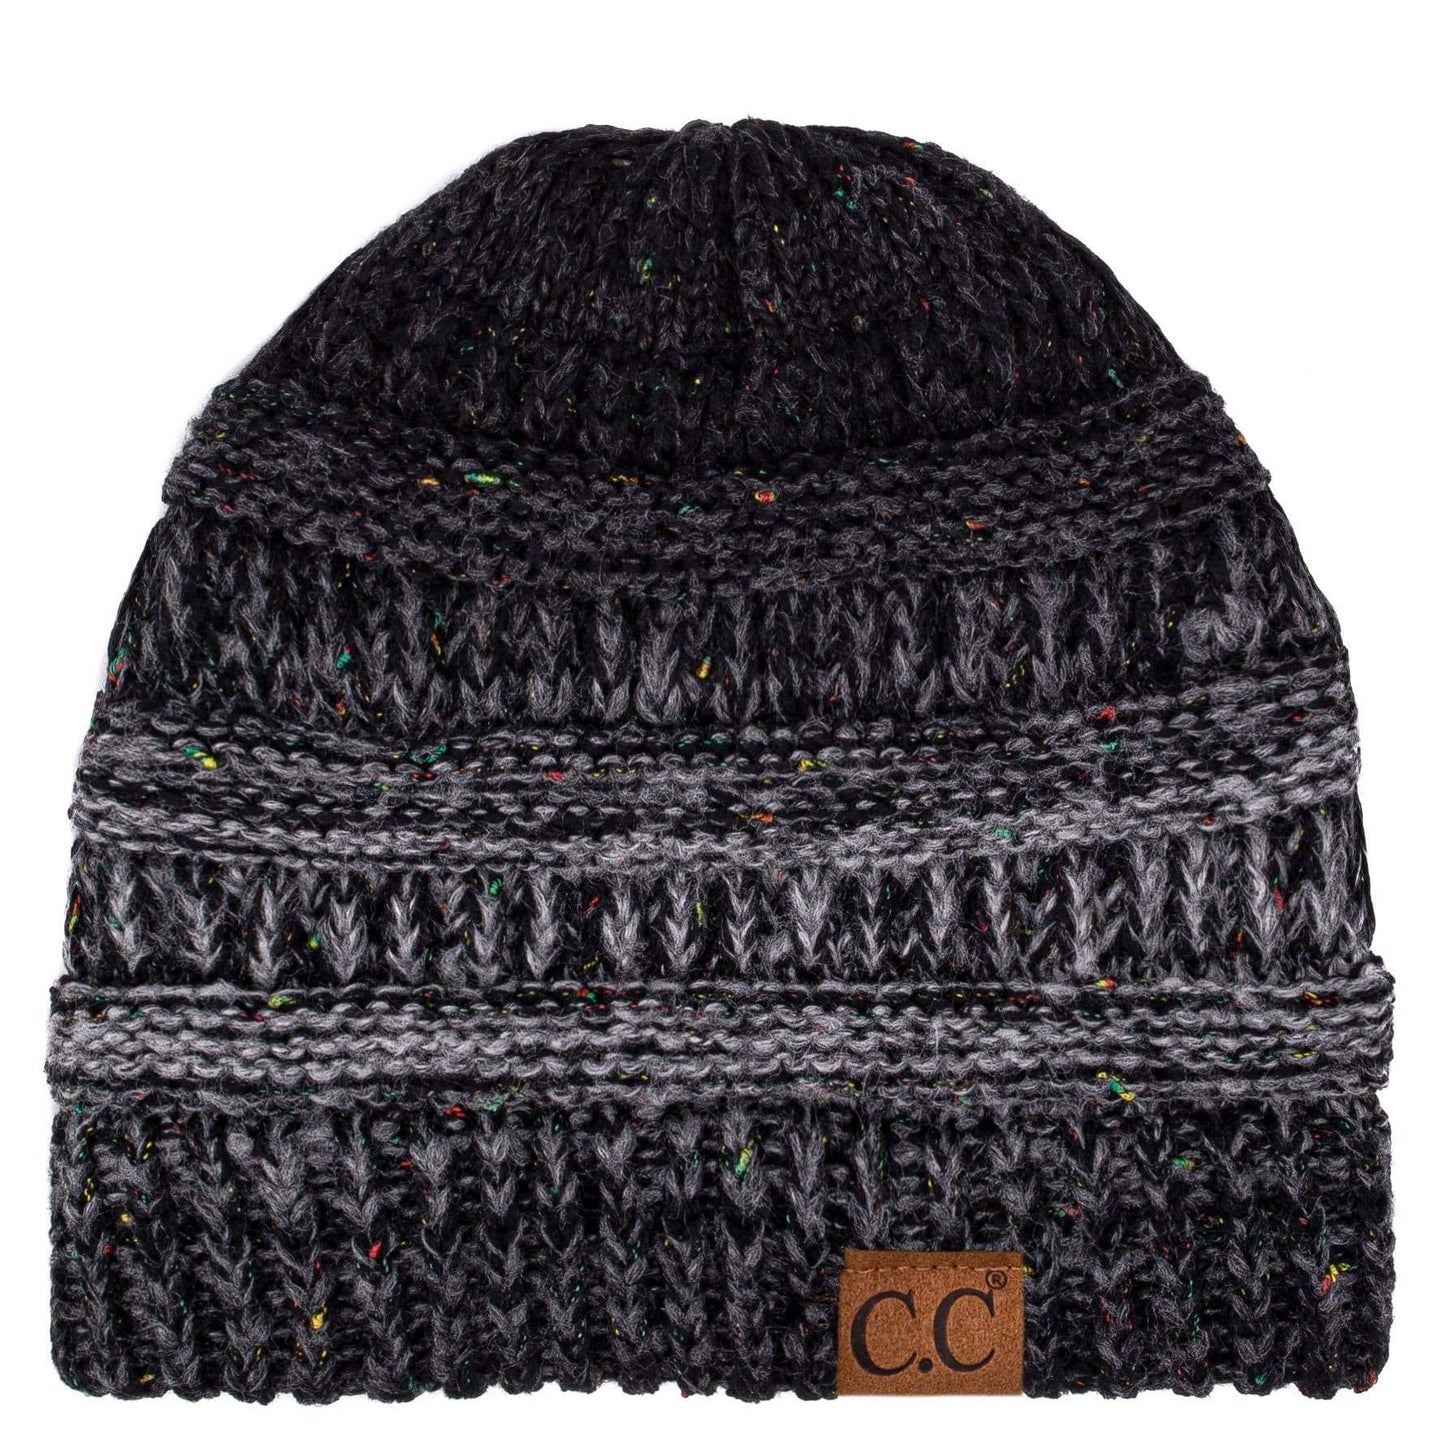 C.C Apparel Ombre Black C.C Trendy Warm Chunky Soft Stretch Ombre Cable Knit Beanie Skully